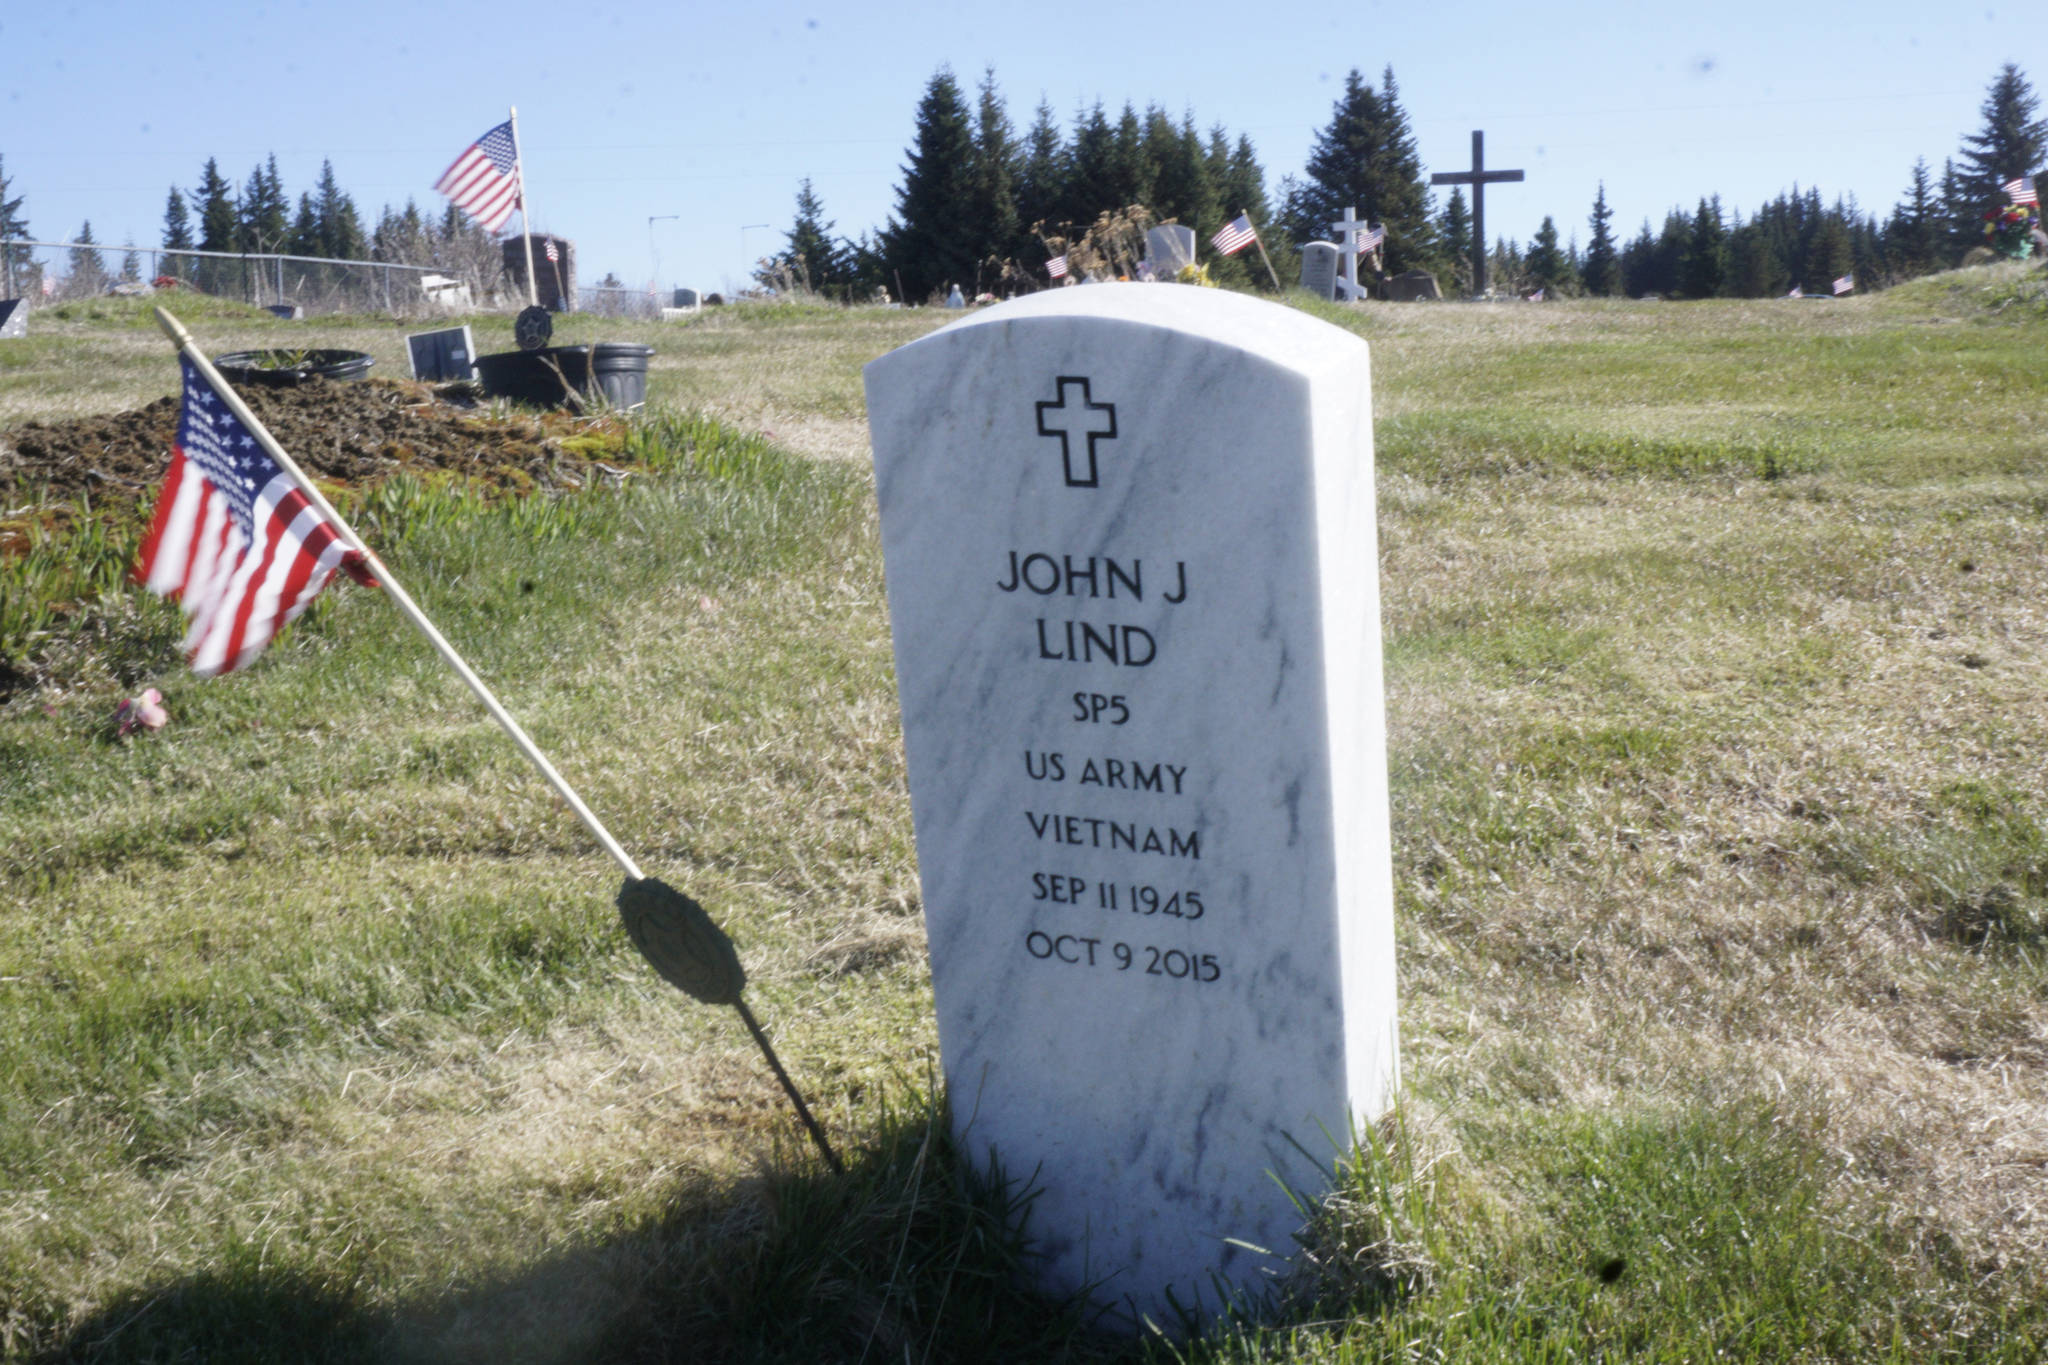 The grave of Vietnam War veteran John J. Lind is one of dozens of graves for veterans decorated by American flags on Memorial Day, May 28, 2018, at Hickerson Memorial Cemetery, Homer. Veterans buried there have served in World War I, World War II, the Korean War and the Vietnam War. (Photo by Michael Armstrong / Homer News)